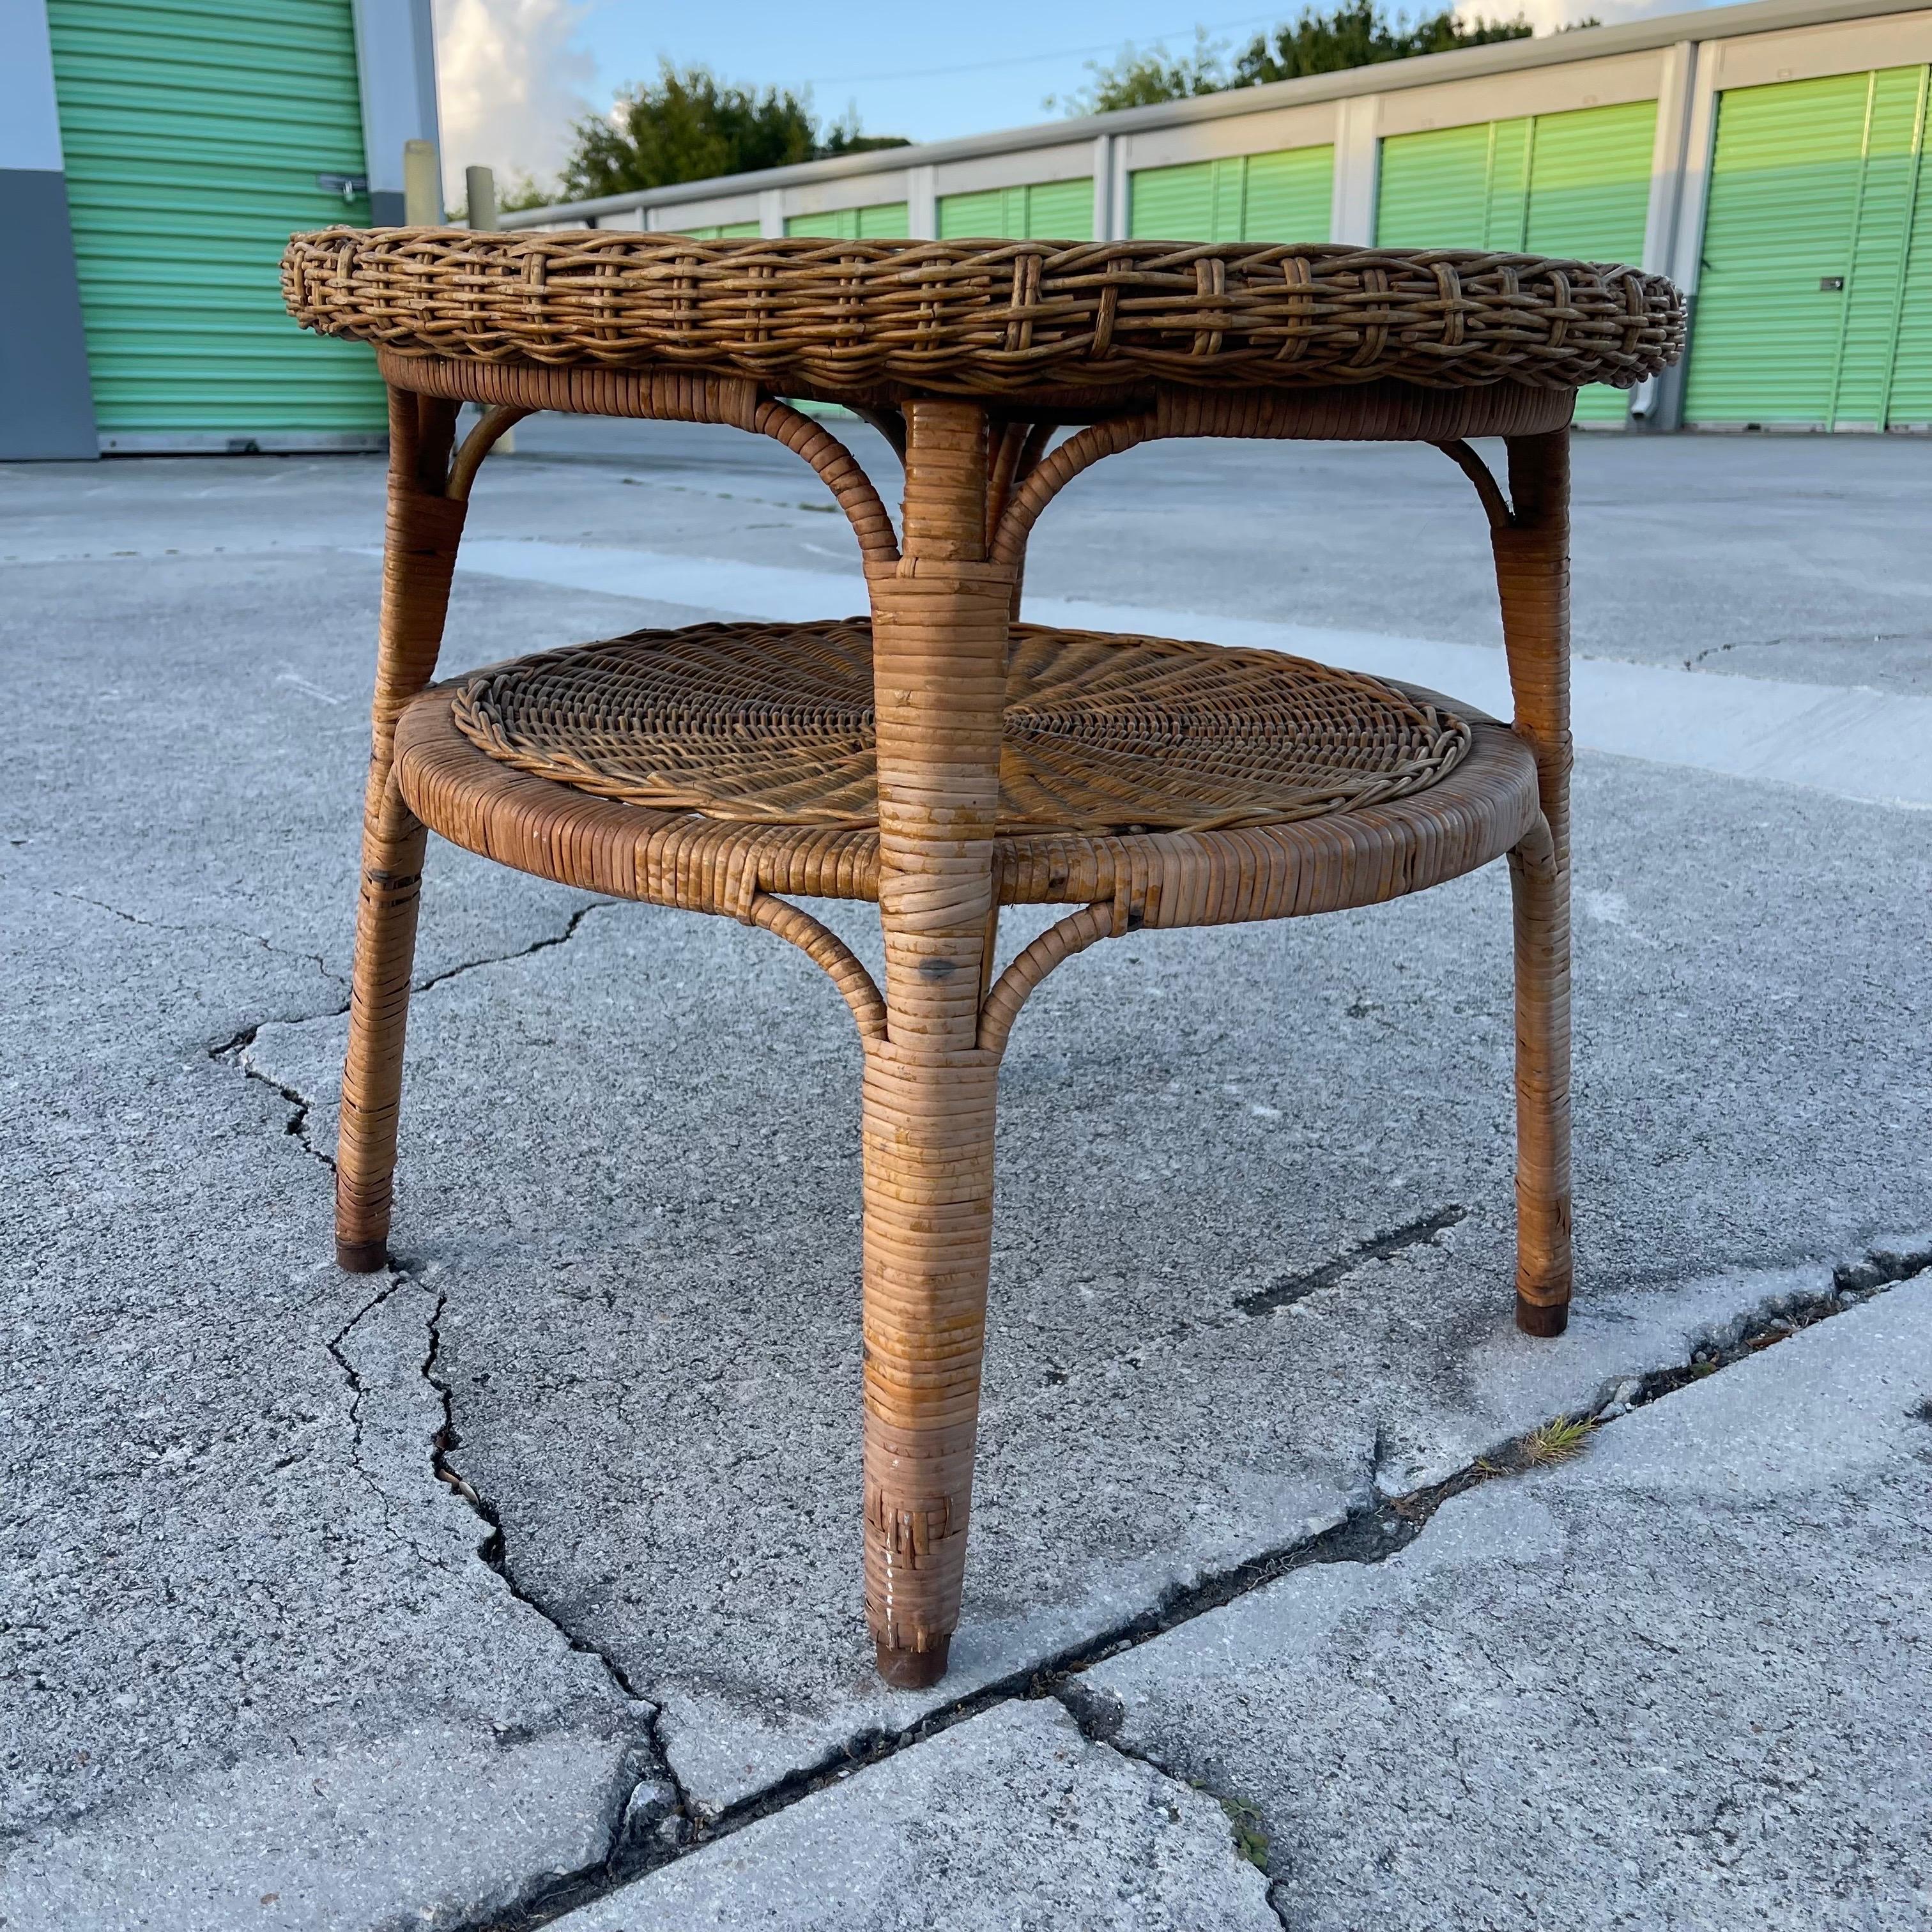 Charming small round coffee or side table made of handwoven wicker.